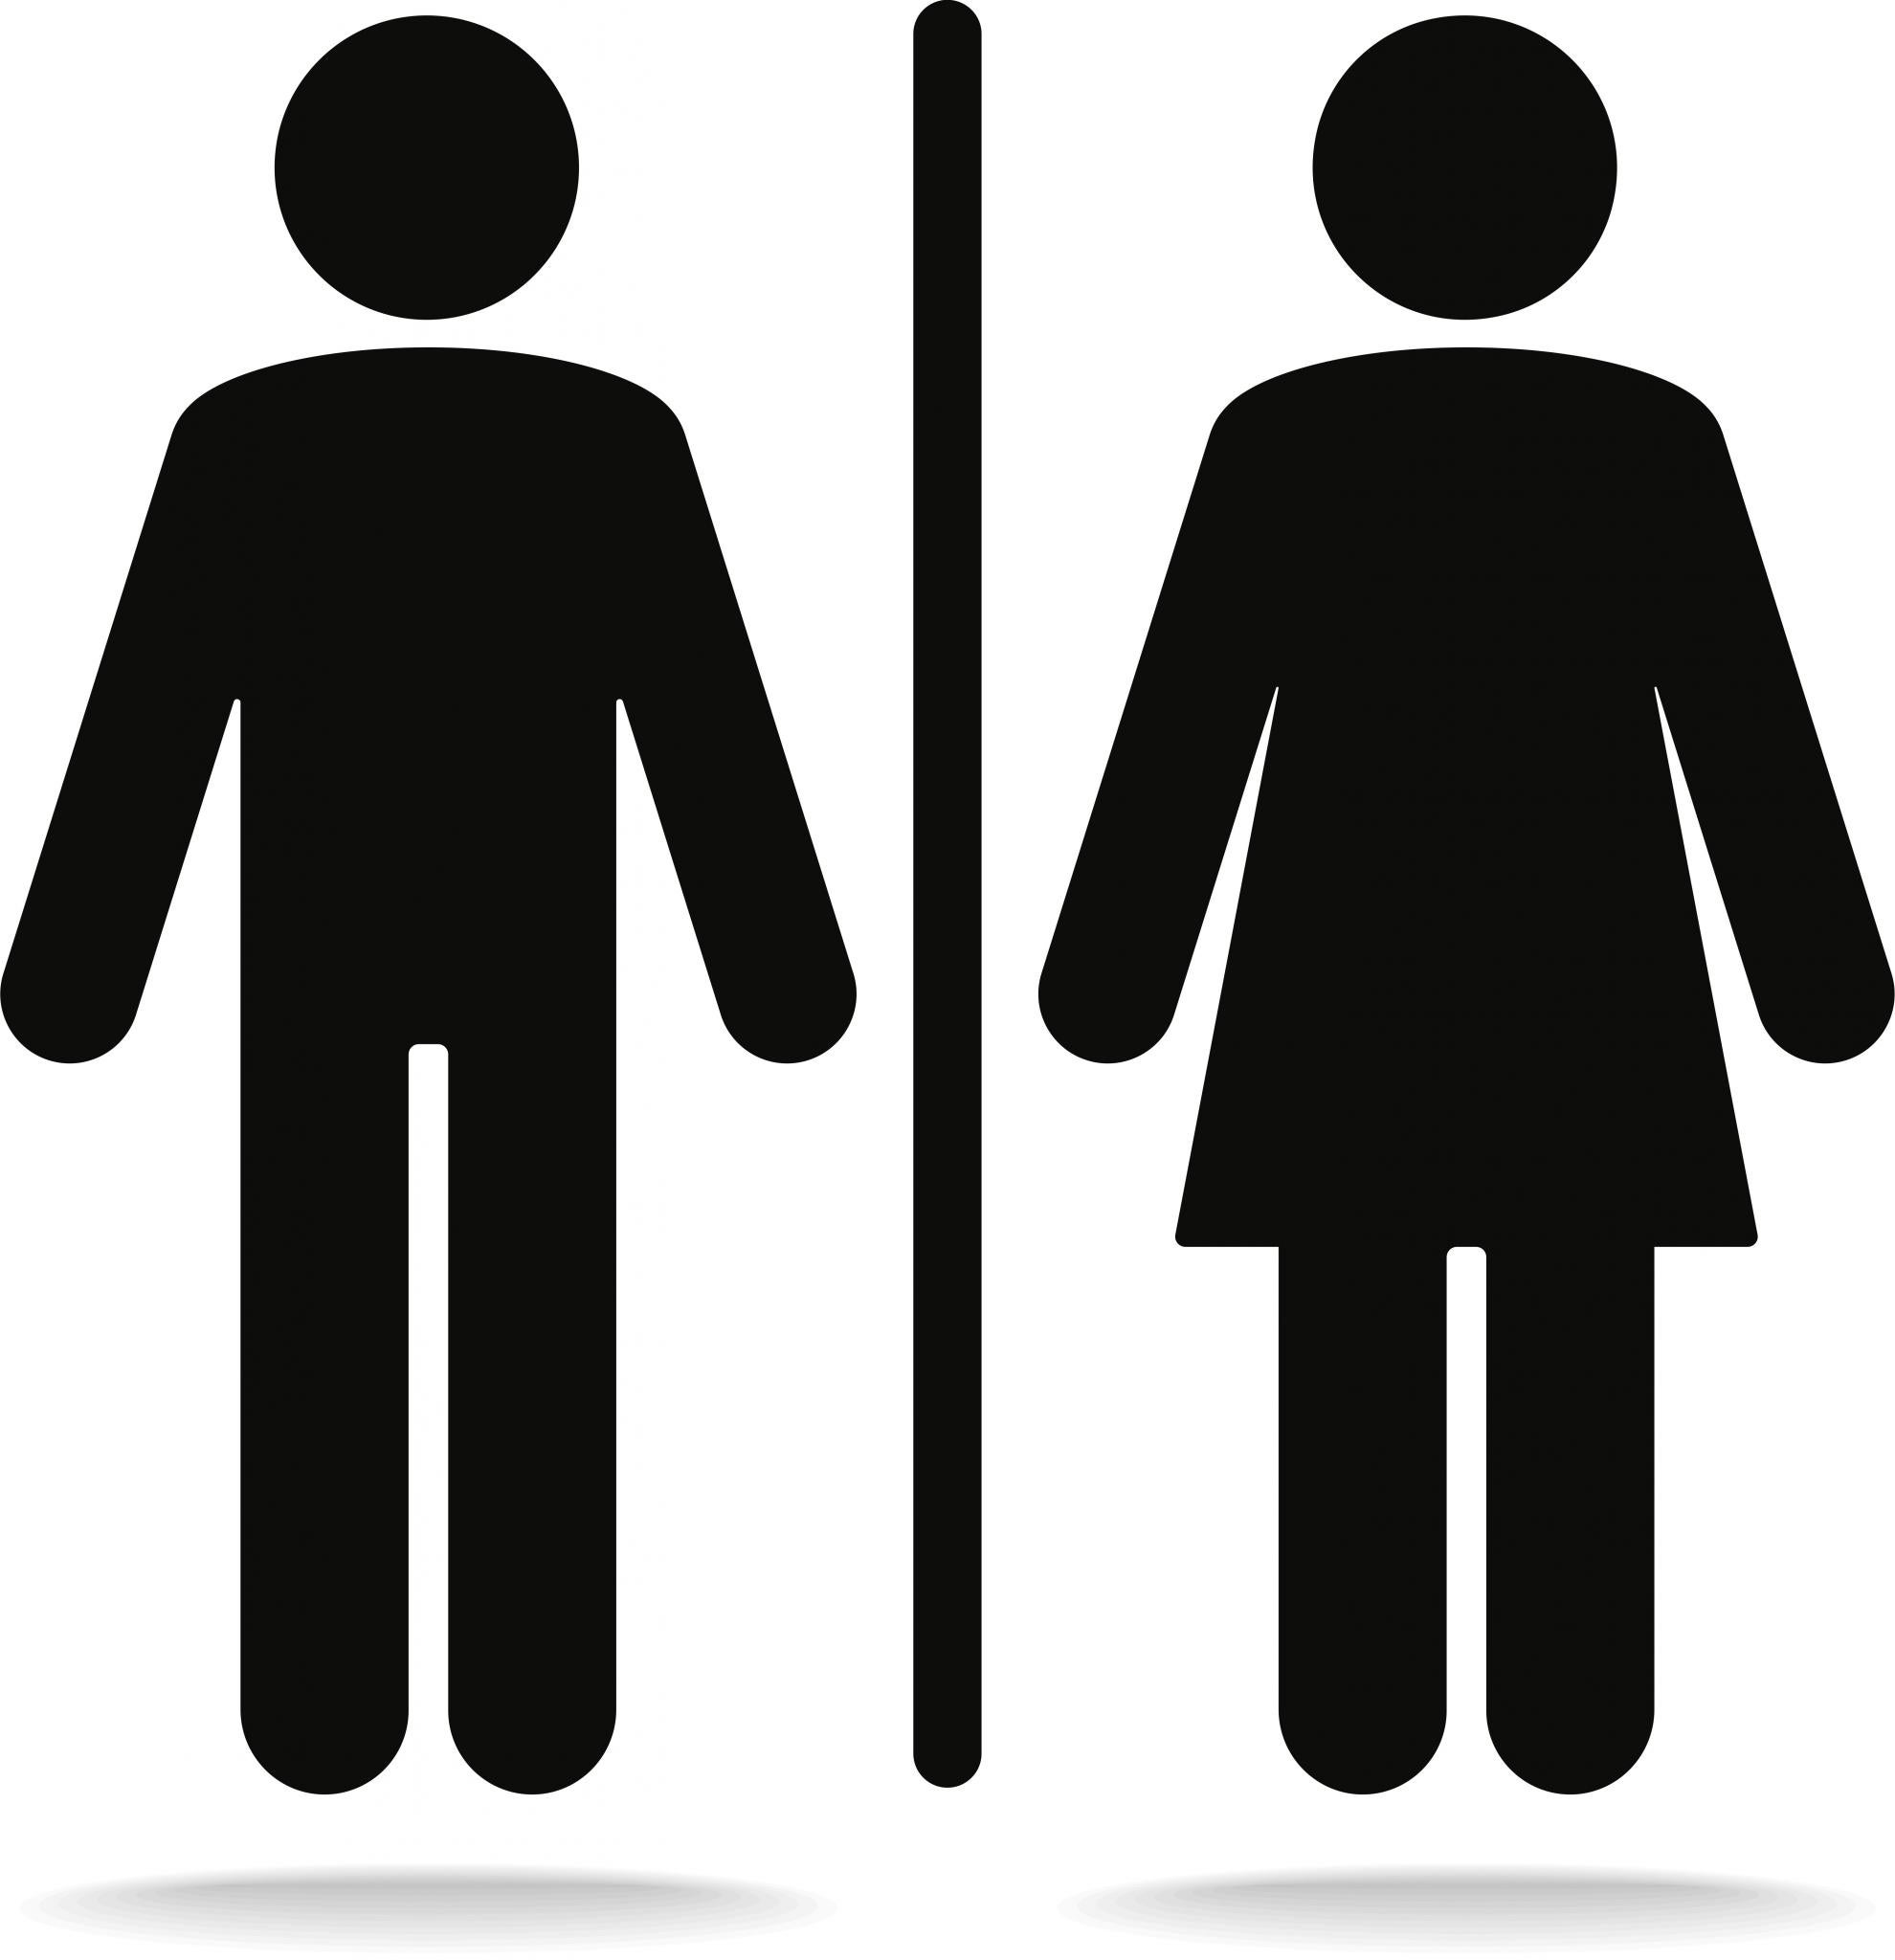 How Do You Feel About Unisex Bathrooms?